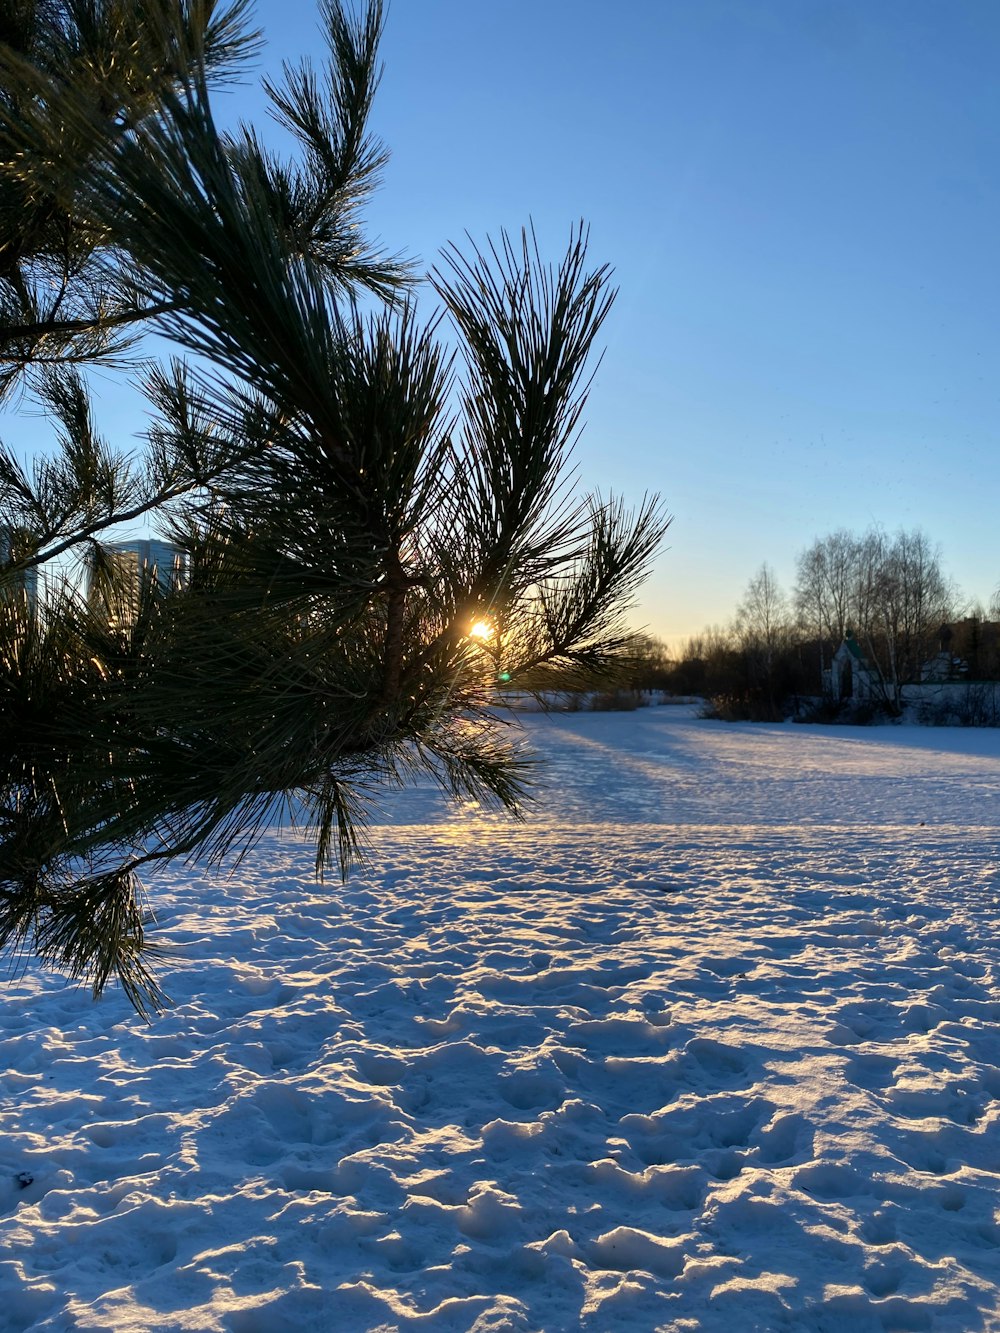 a snow covered field with a pine tree in the foreground